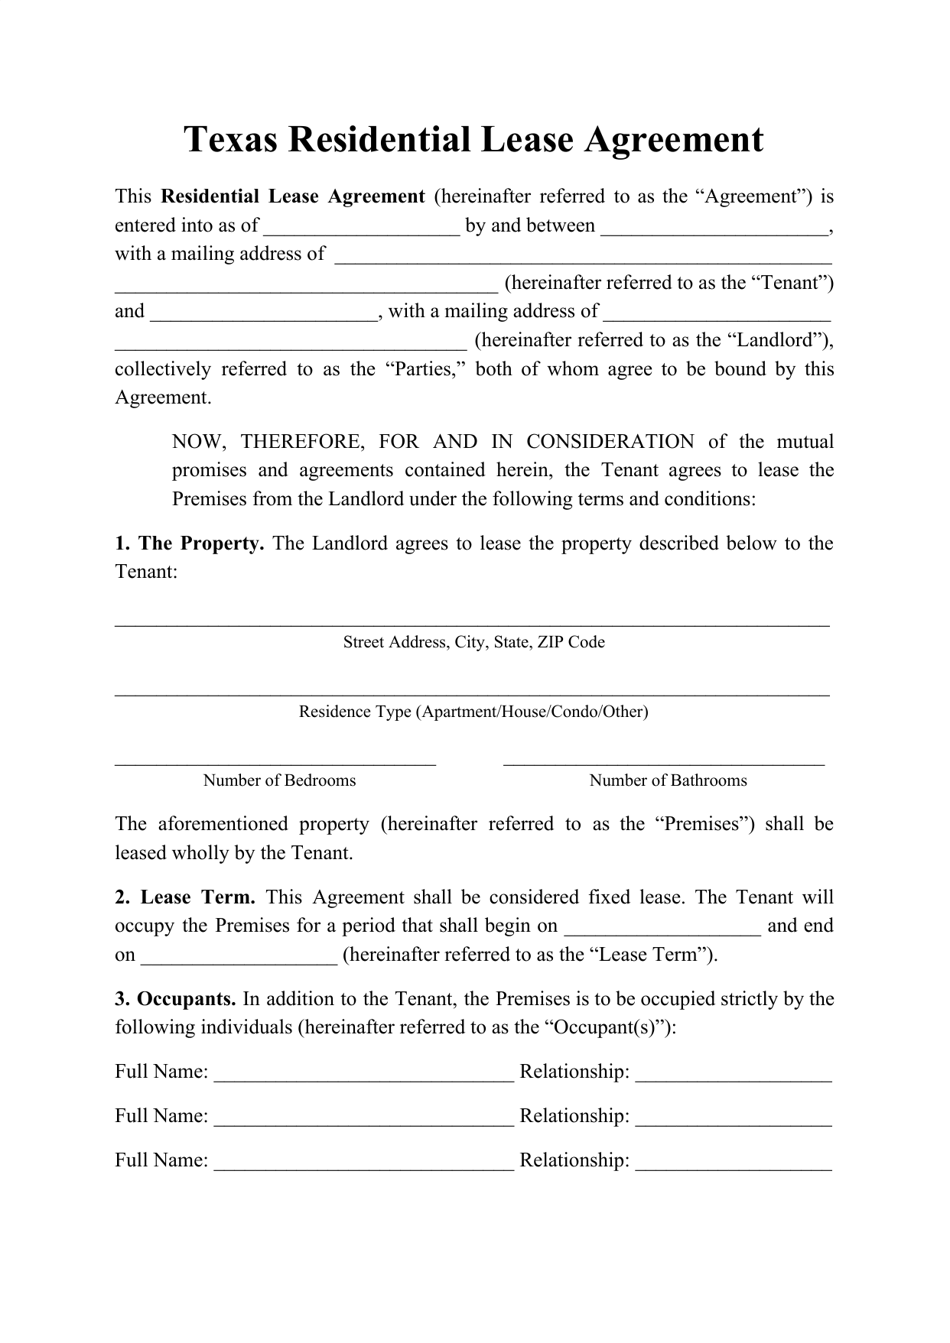 Residential Lease Agreement Template - Texas, Page 1